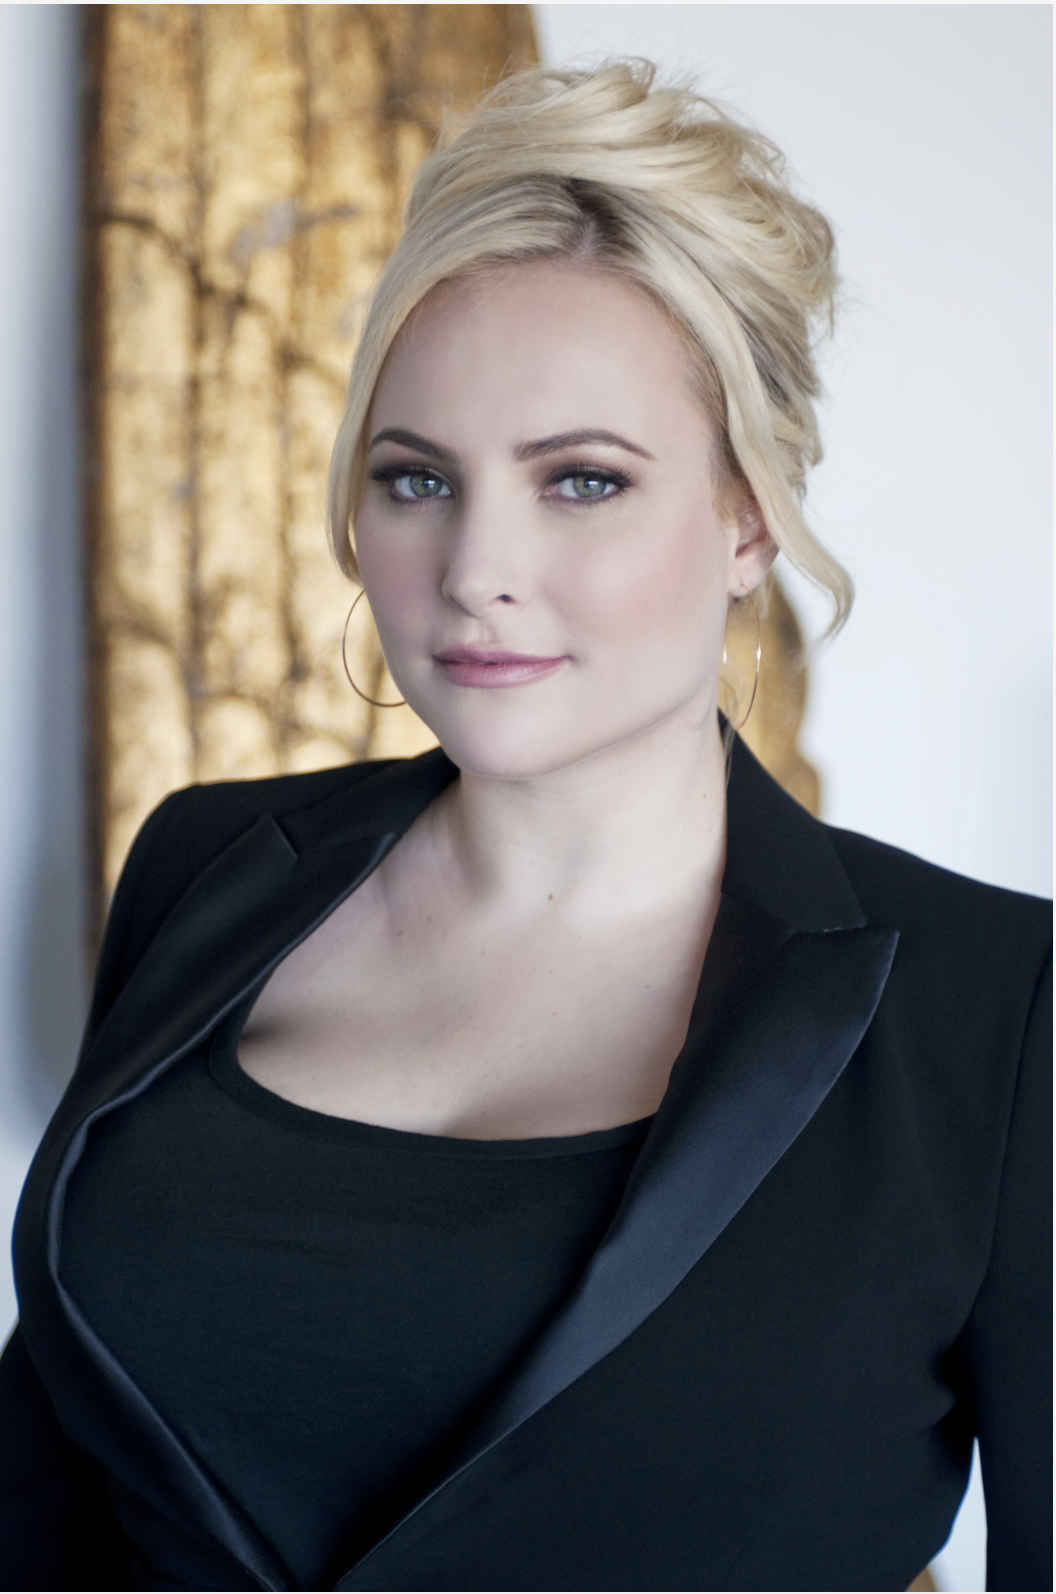 ABC'S THE VIEW HOST MEGHAN MCCAIN TO BE RECOGNIZED DURING DIVERSITY HONORS ON MARCH 30 AT THE SEMINOLE HARD ROCK HOTEL & CASINO.